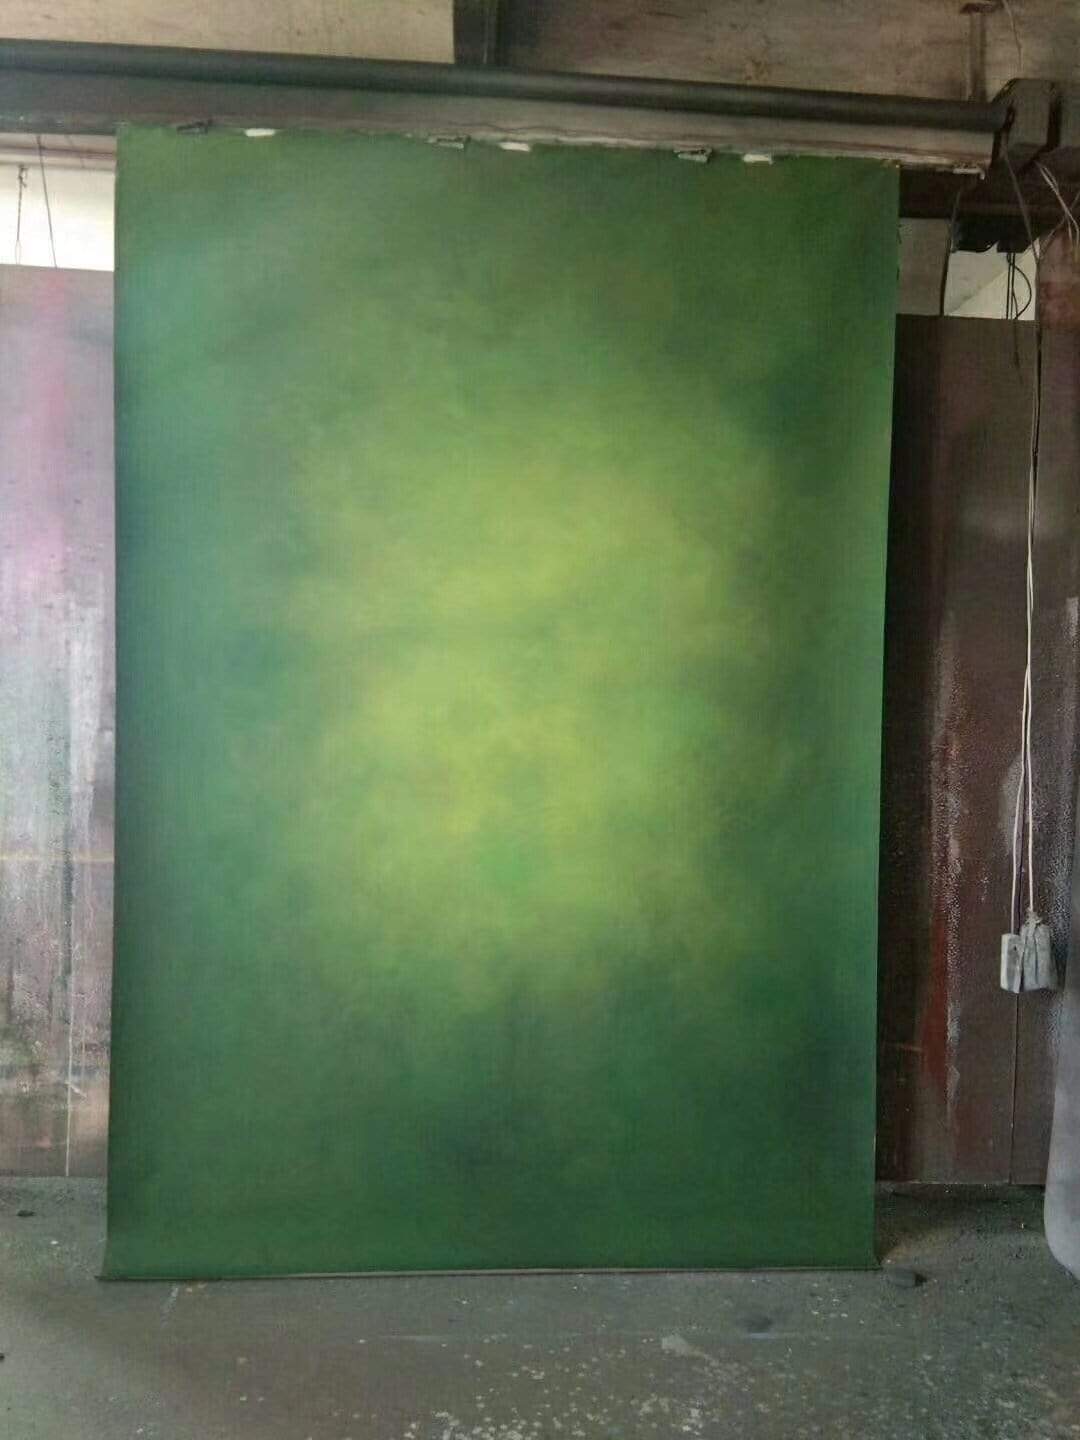 Kate Foggy Green Abstract Gradient Texture Spray Painted Backdrop - katebackdrop AU